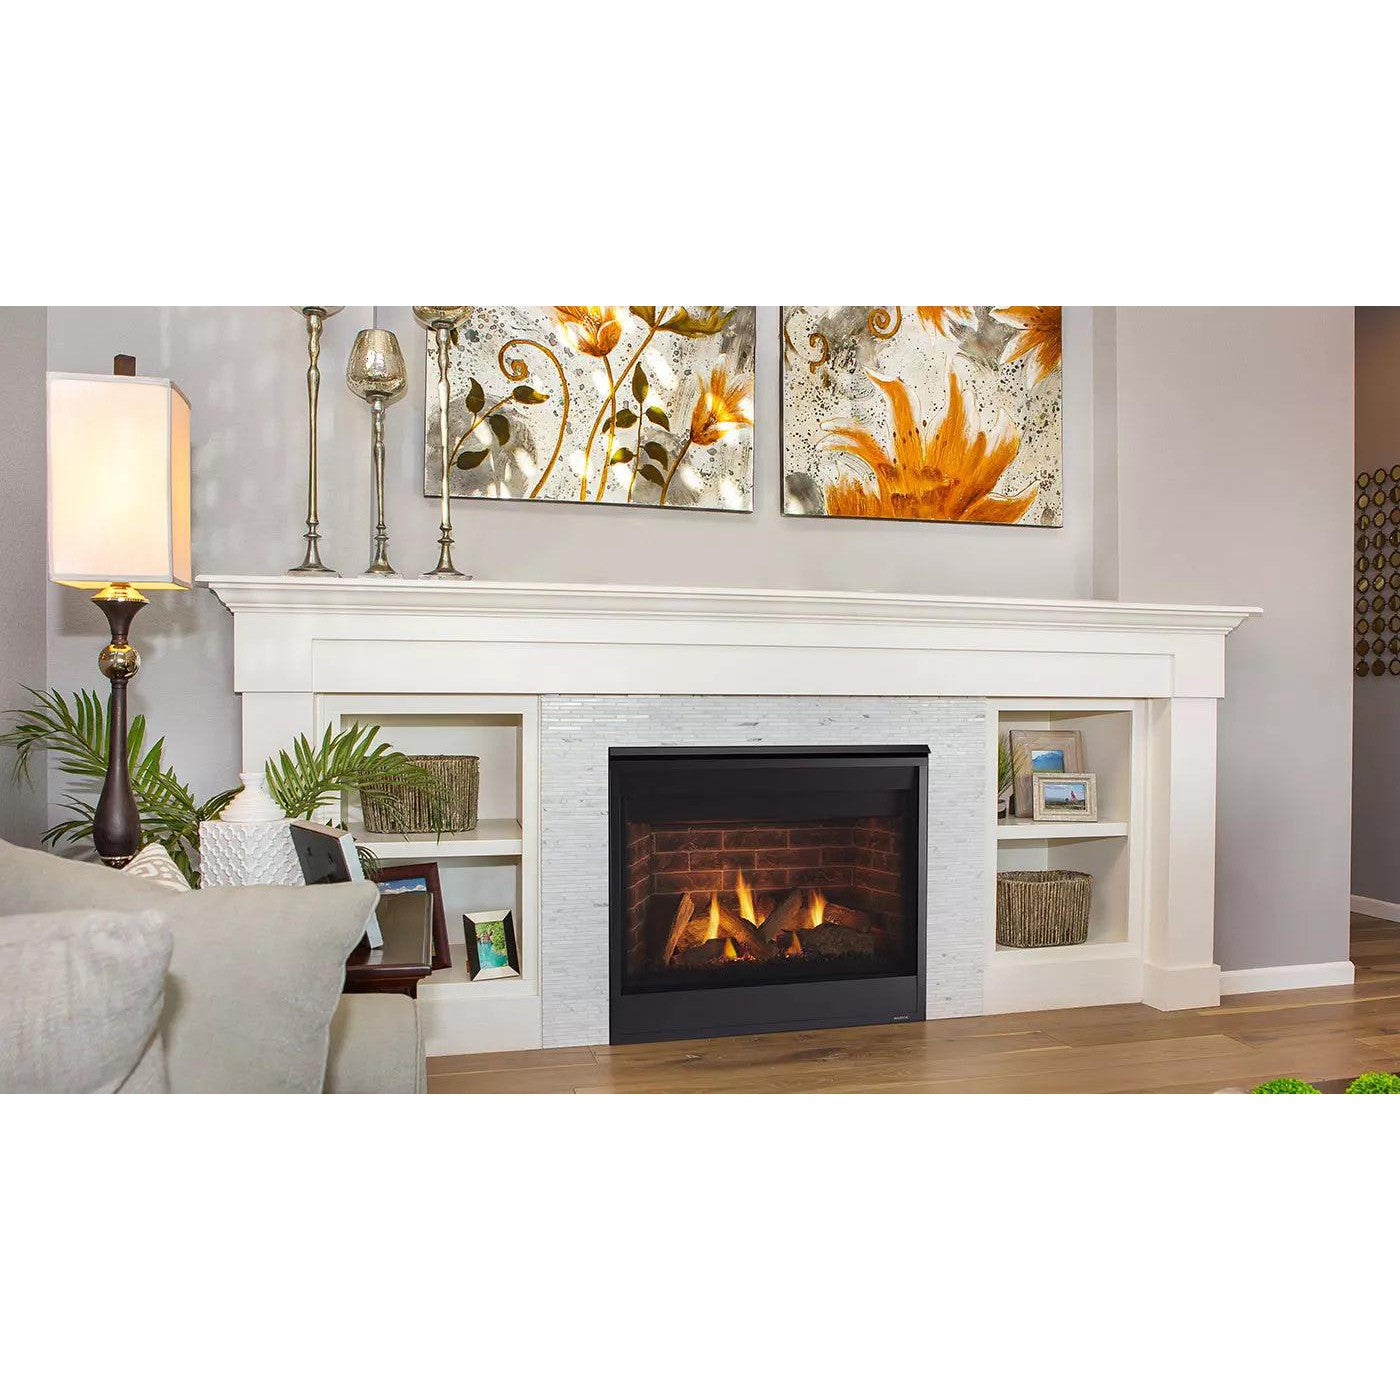 6000C 36 Direct Vent Gas Fireplace Top/Rear Vent with IntelliFire Touch  Ignition (NG)